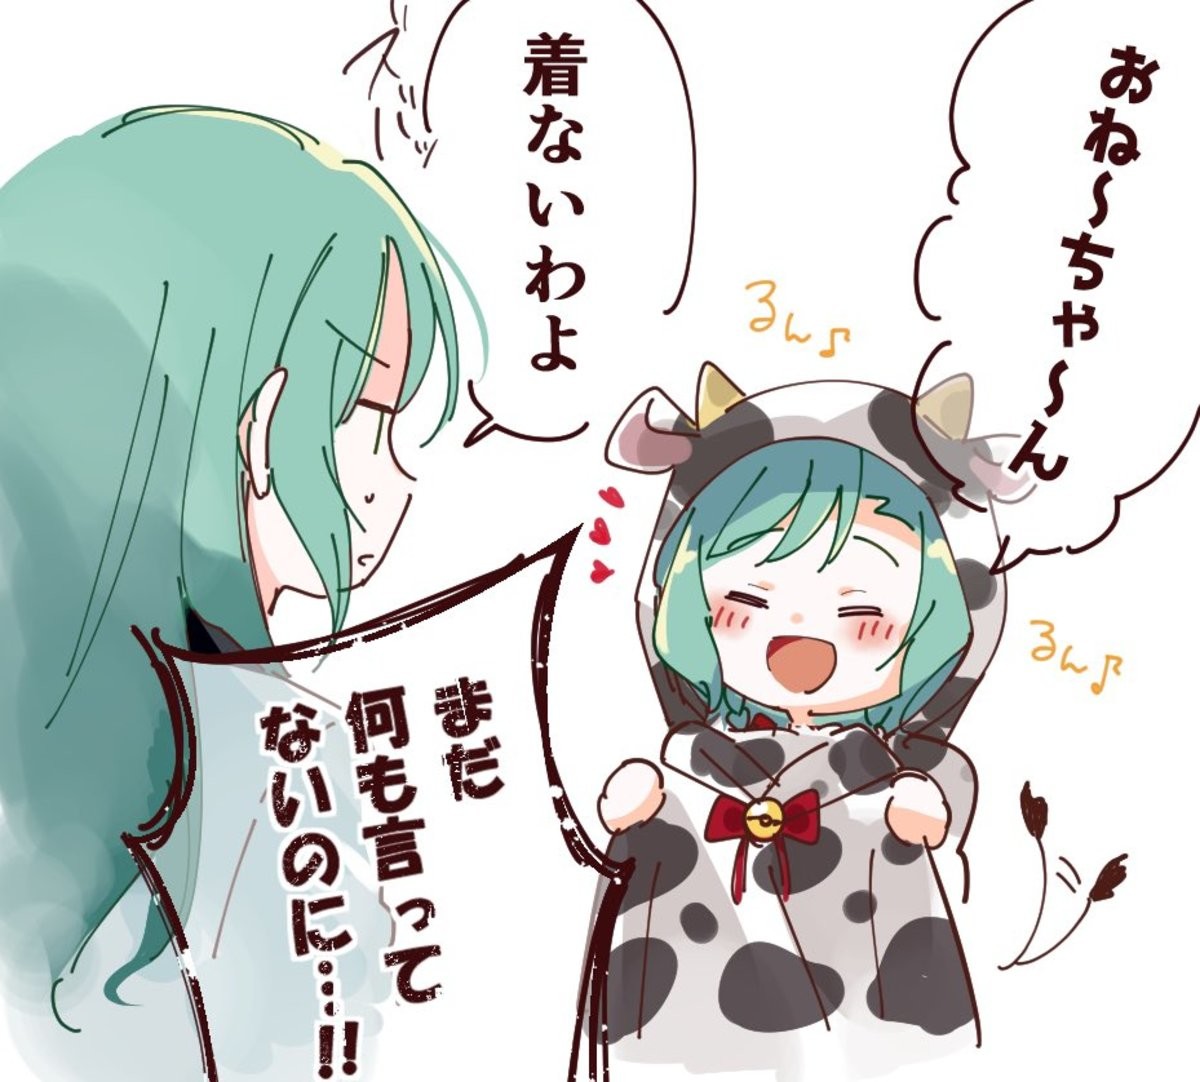 Daily BanG Dream #440. Hina: &quot;Onee-Chan&quot; Sayo: &quot;I won't wear it ...And say nothing!&quot; Sayo: &quot;I was made to wear it after all&quot; Artis